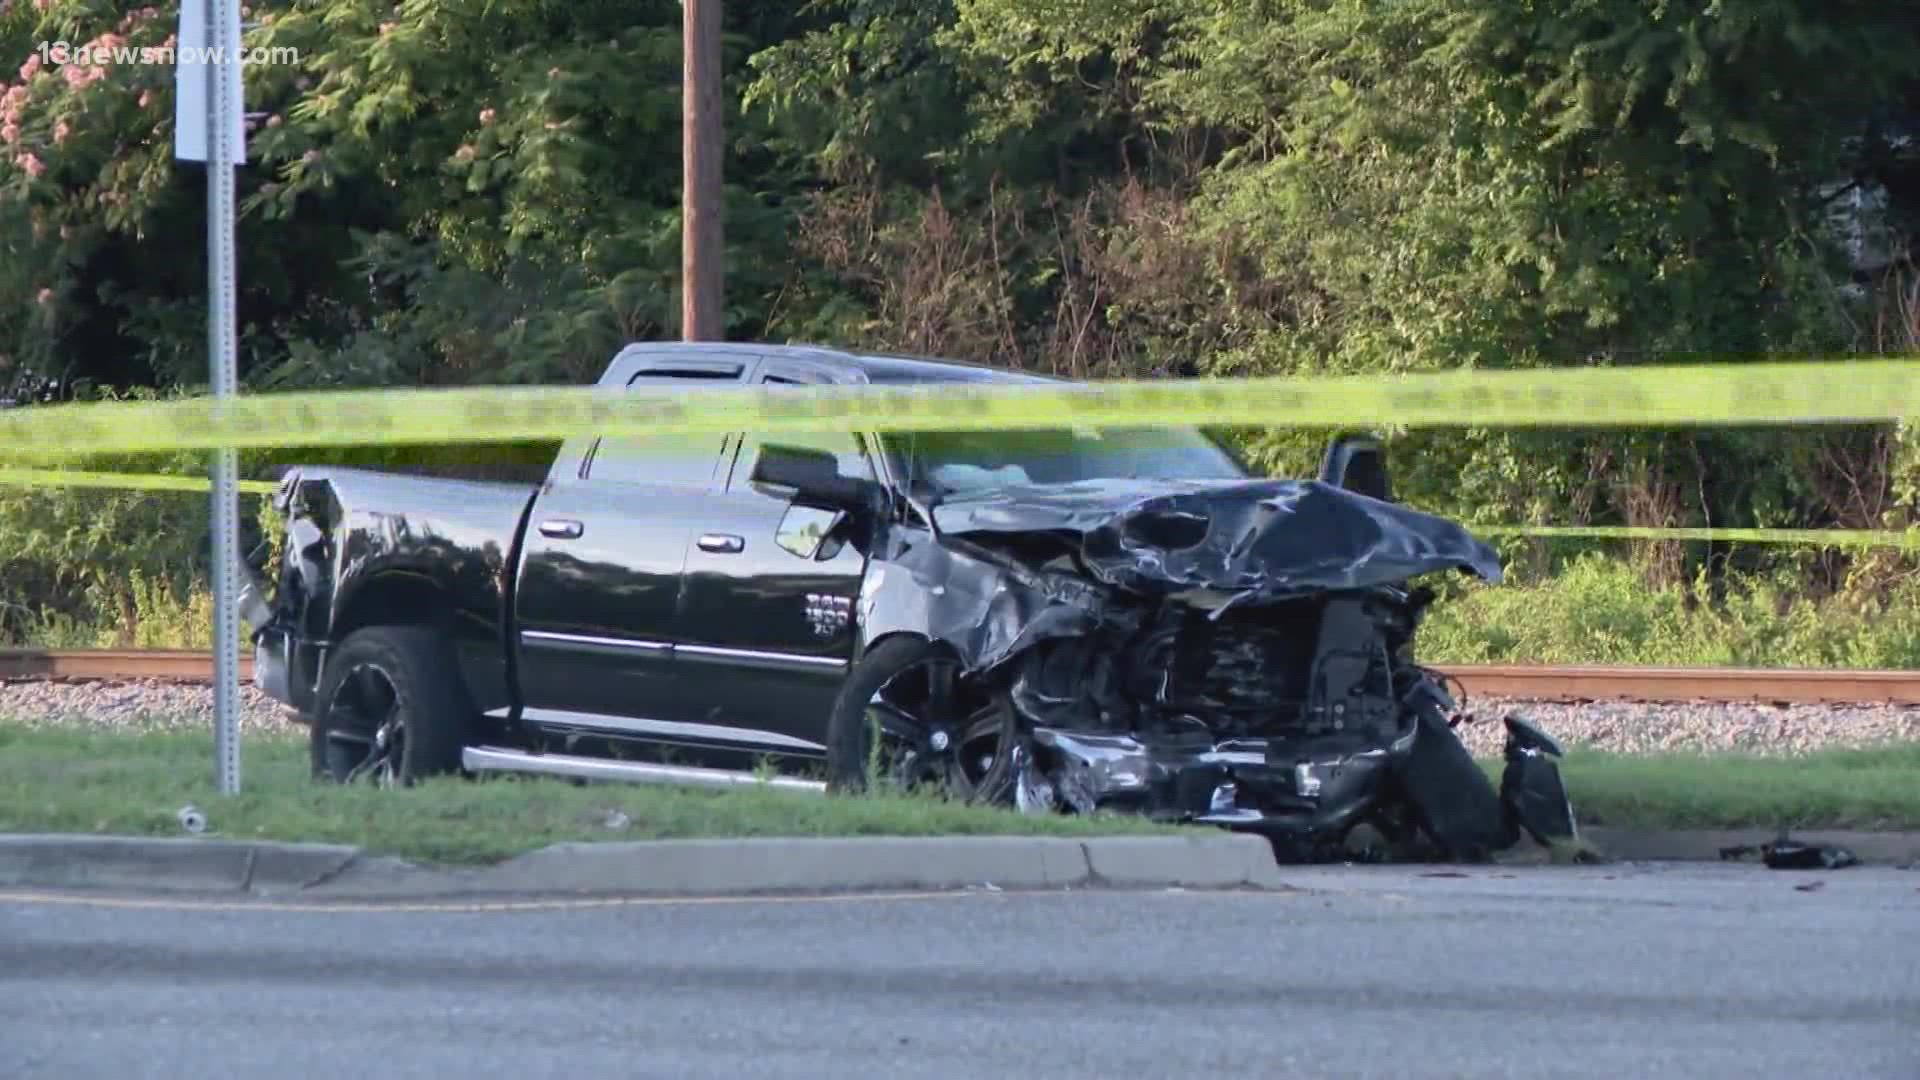 A two-vehicle crash in Portsmouth left two people dead and two others hurt, according to the police department.